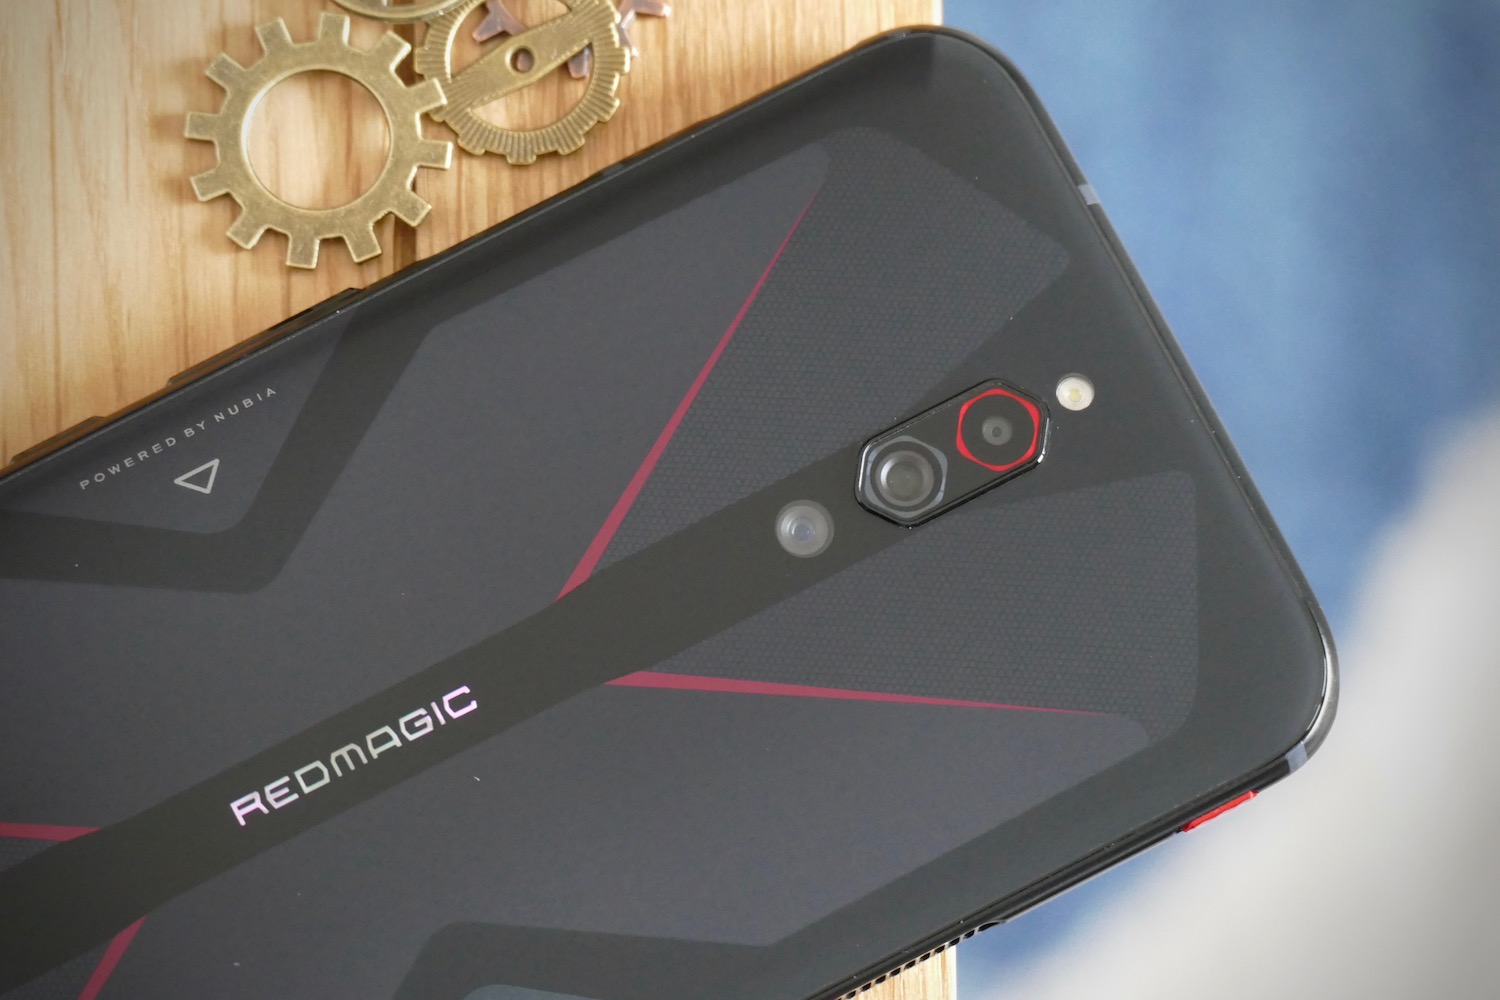 Nubia Red Magic 5G Review: Wins at Games, Misses Elsewhere